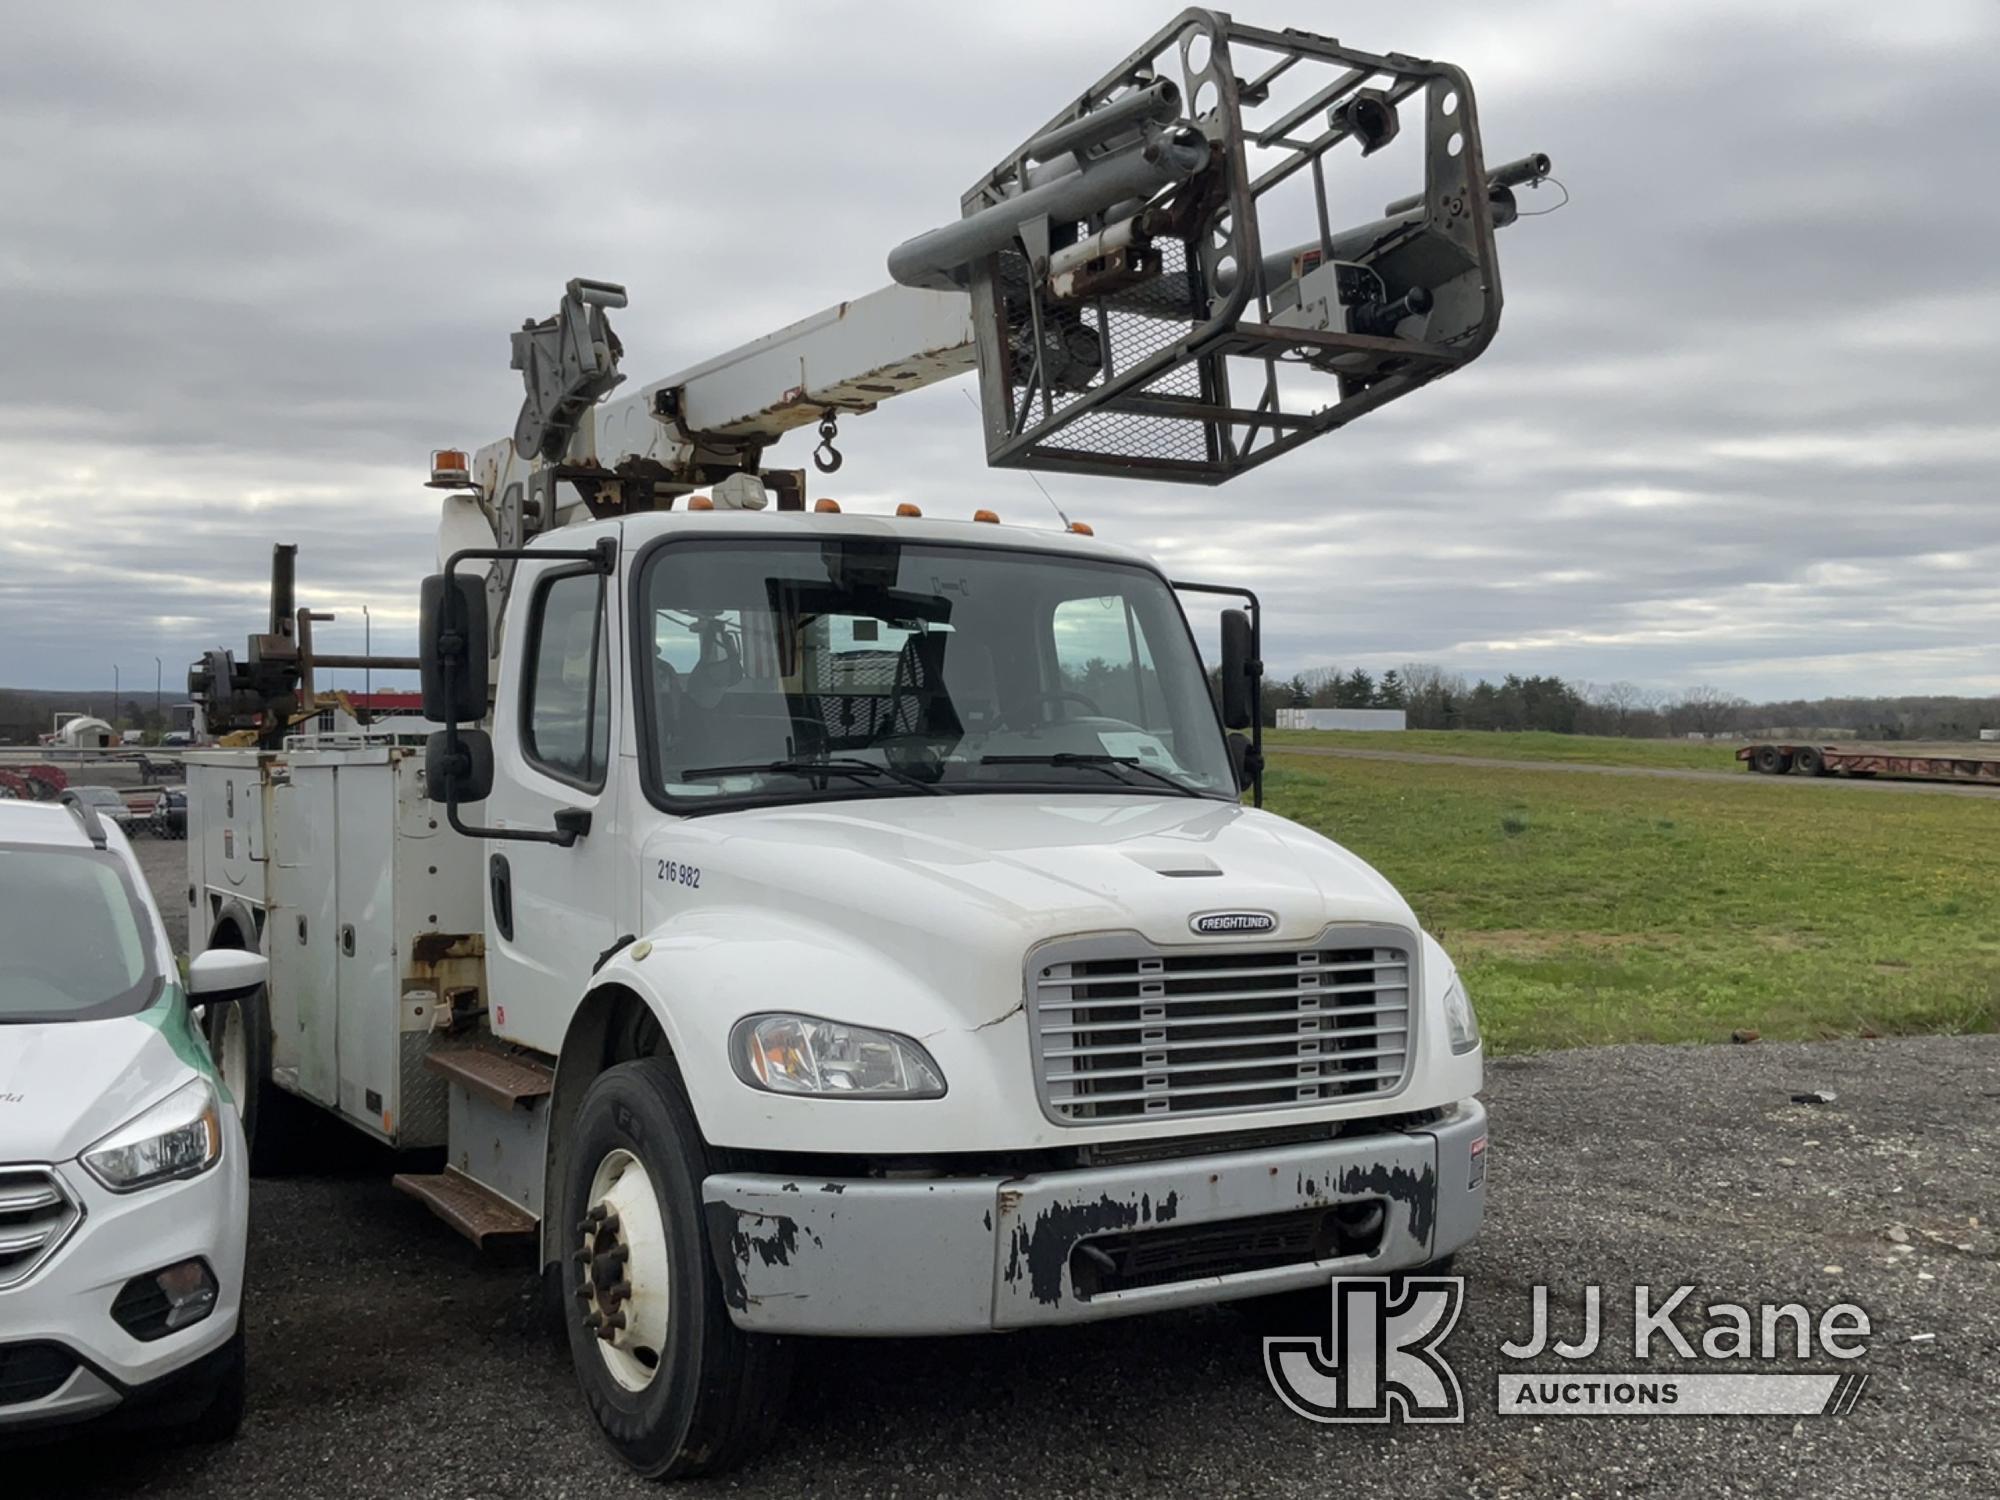 (Ashland, OH) Altec T40P, Non-Insulated Cable Placing Bucket Truck center mounted on 2016 Freightlin